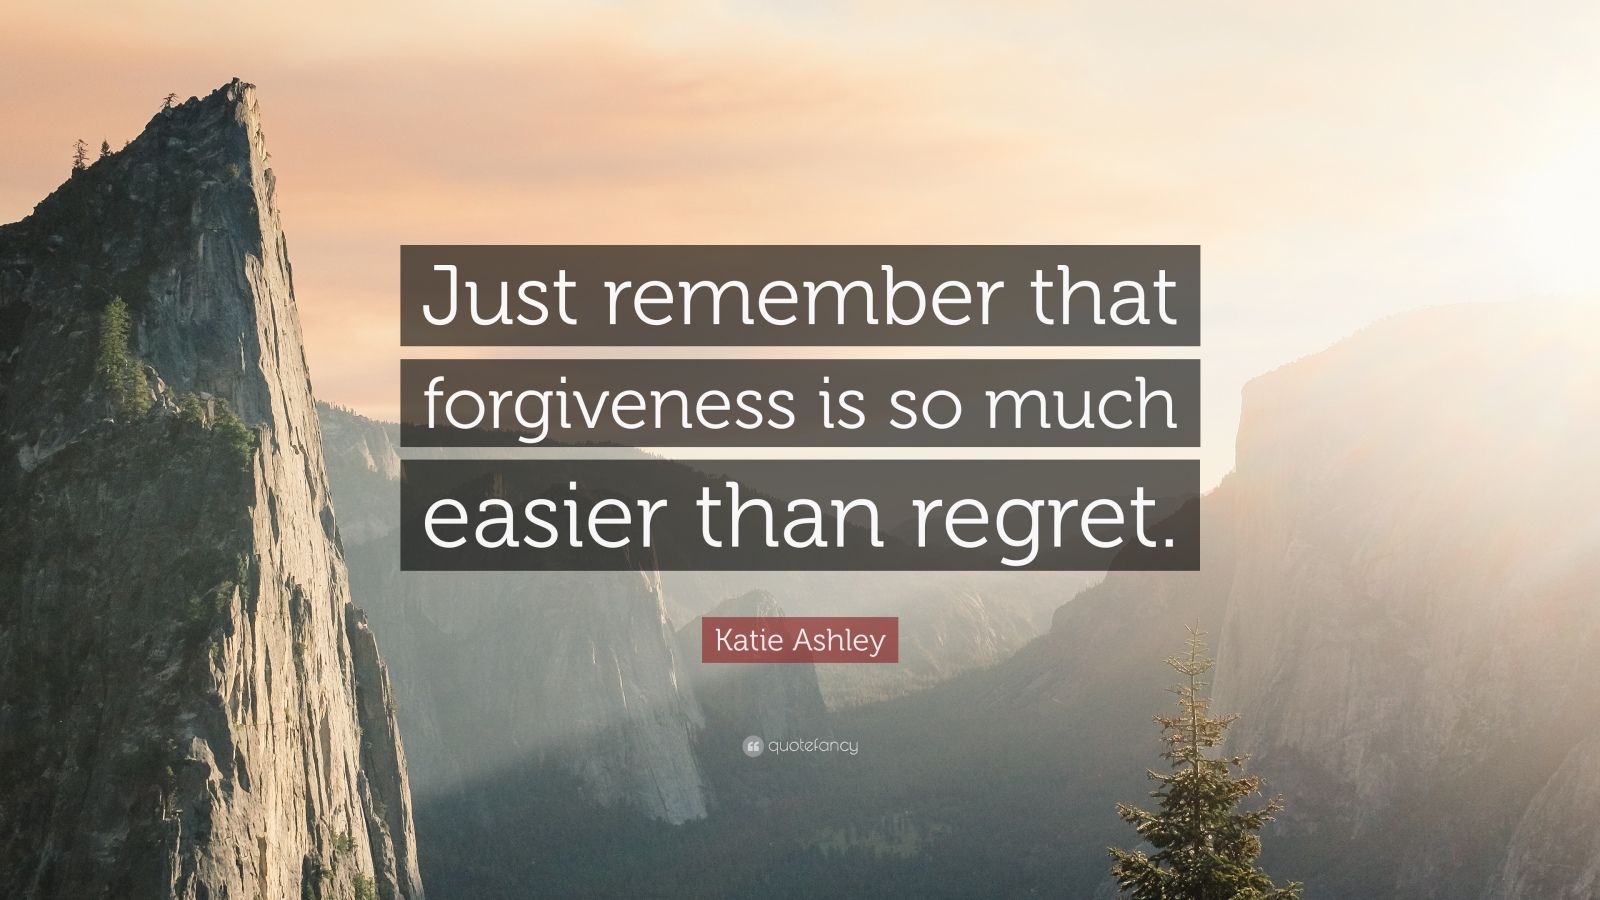 Katie Ashley Quote: “Just remember that forgiveness is so much easier ...